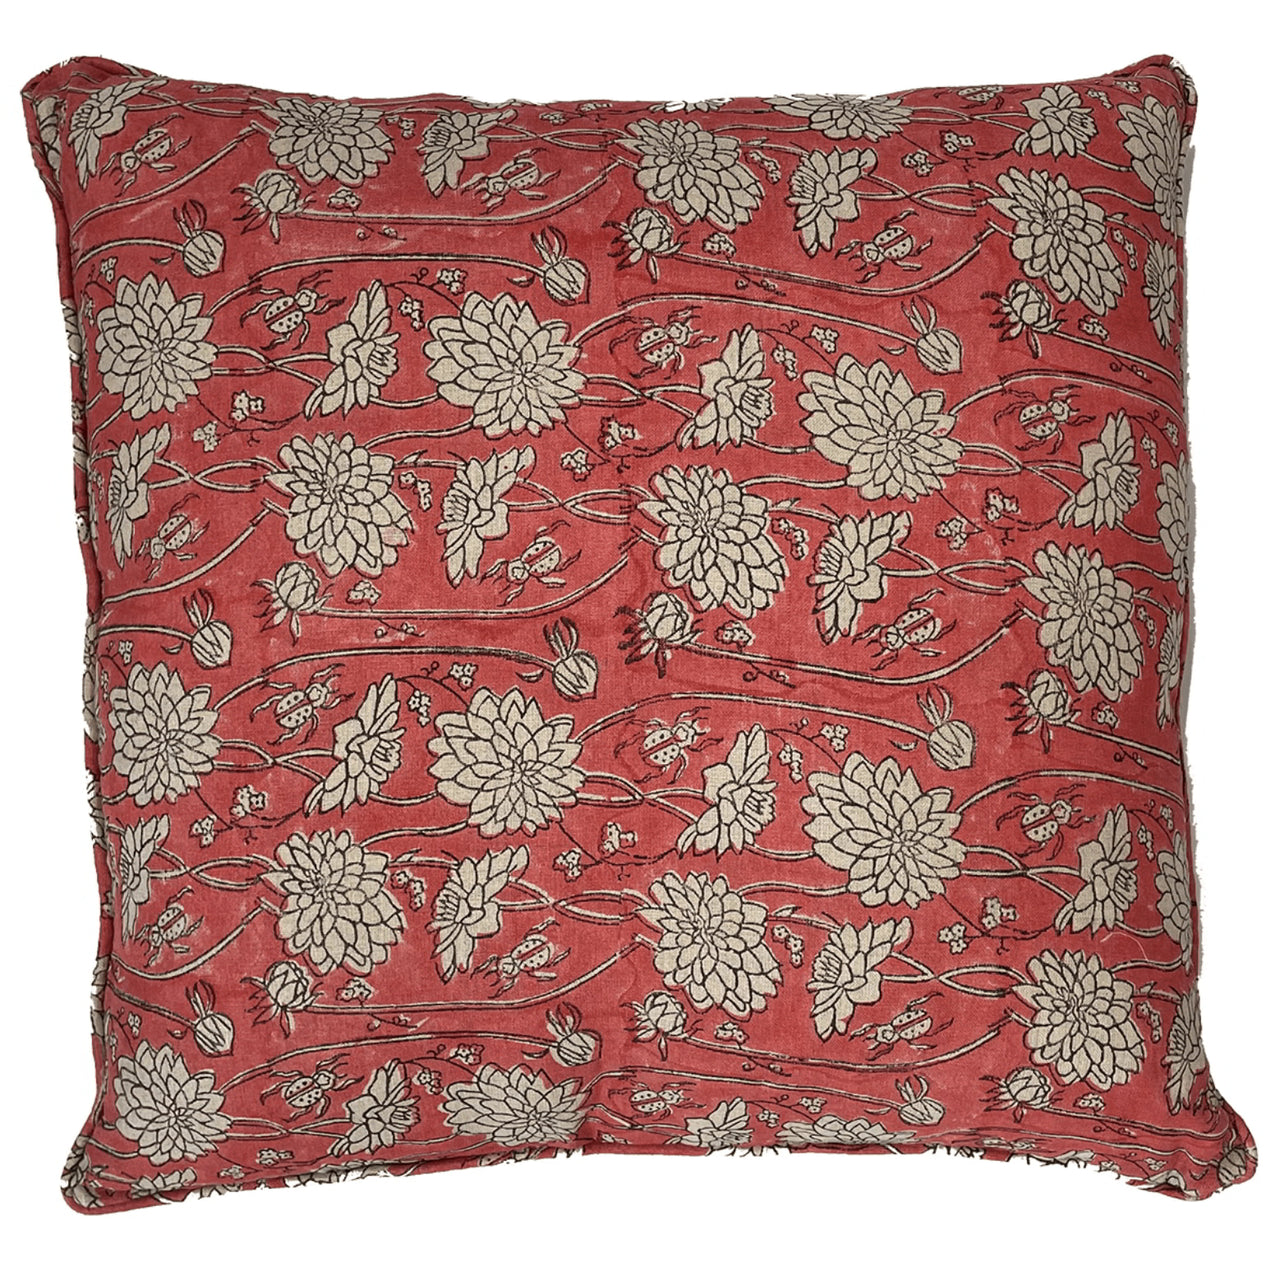 Linen Cushion - Classic Block Print - Pink House of Dudley